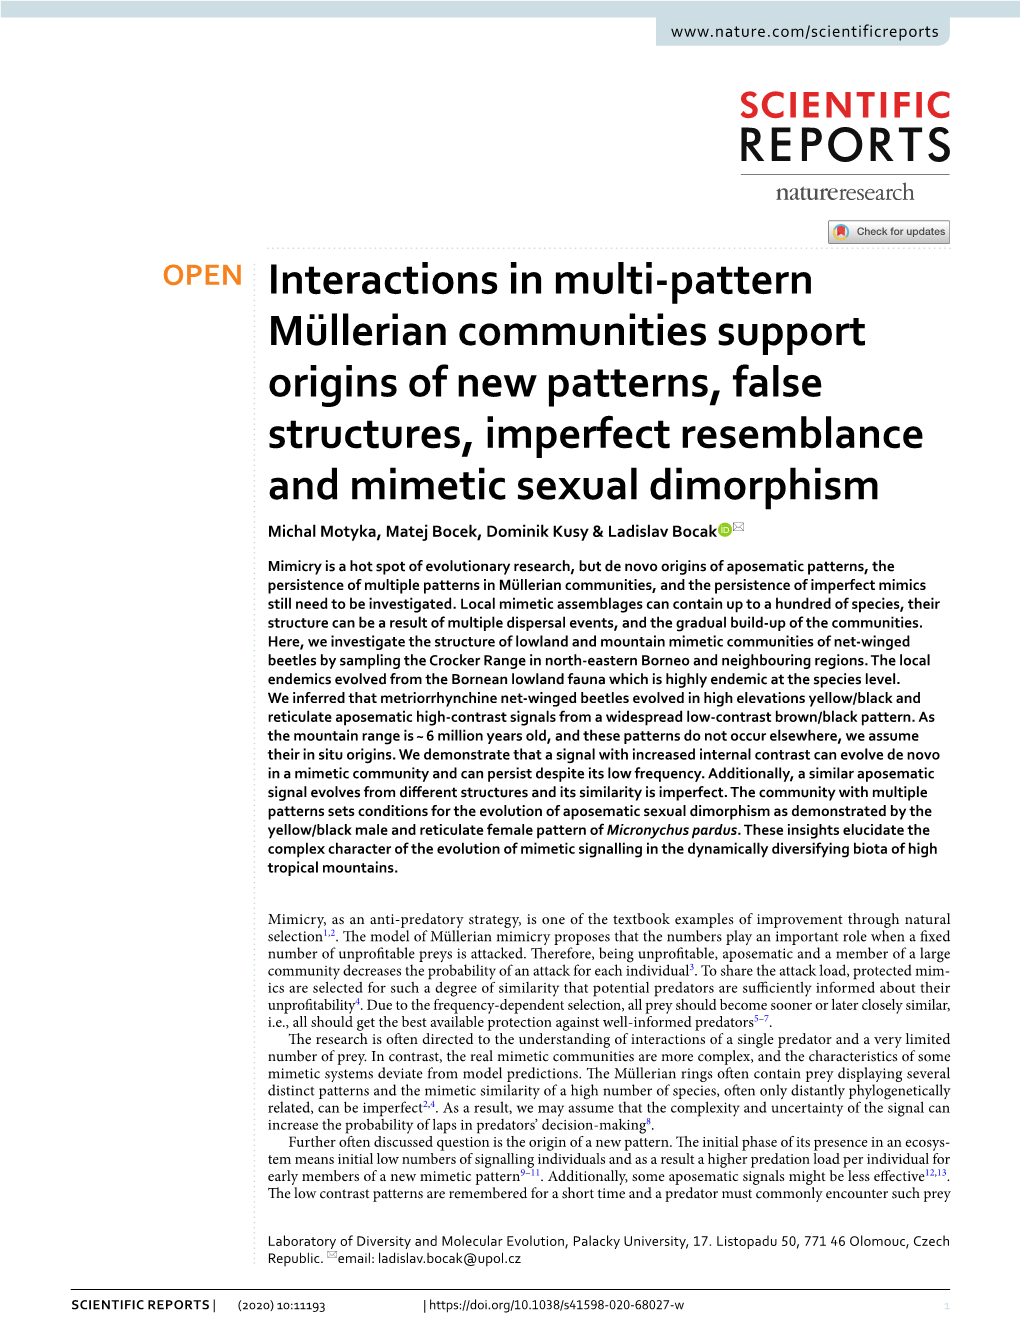 Interactions in Multi-Pattern Müllerian Communities Support Origins of New